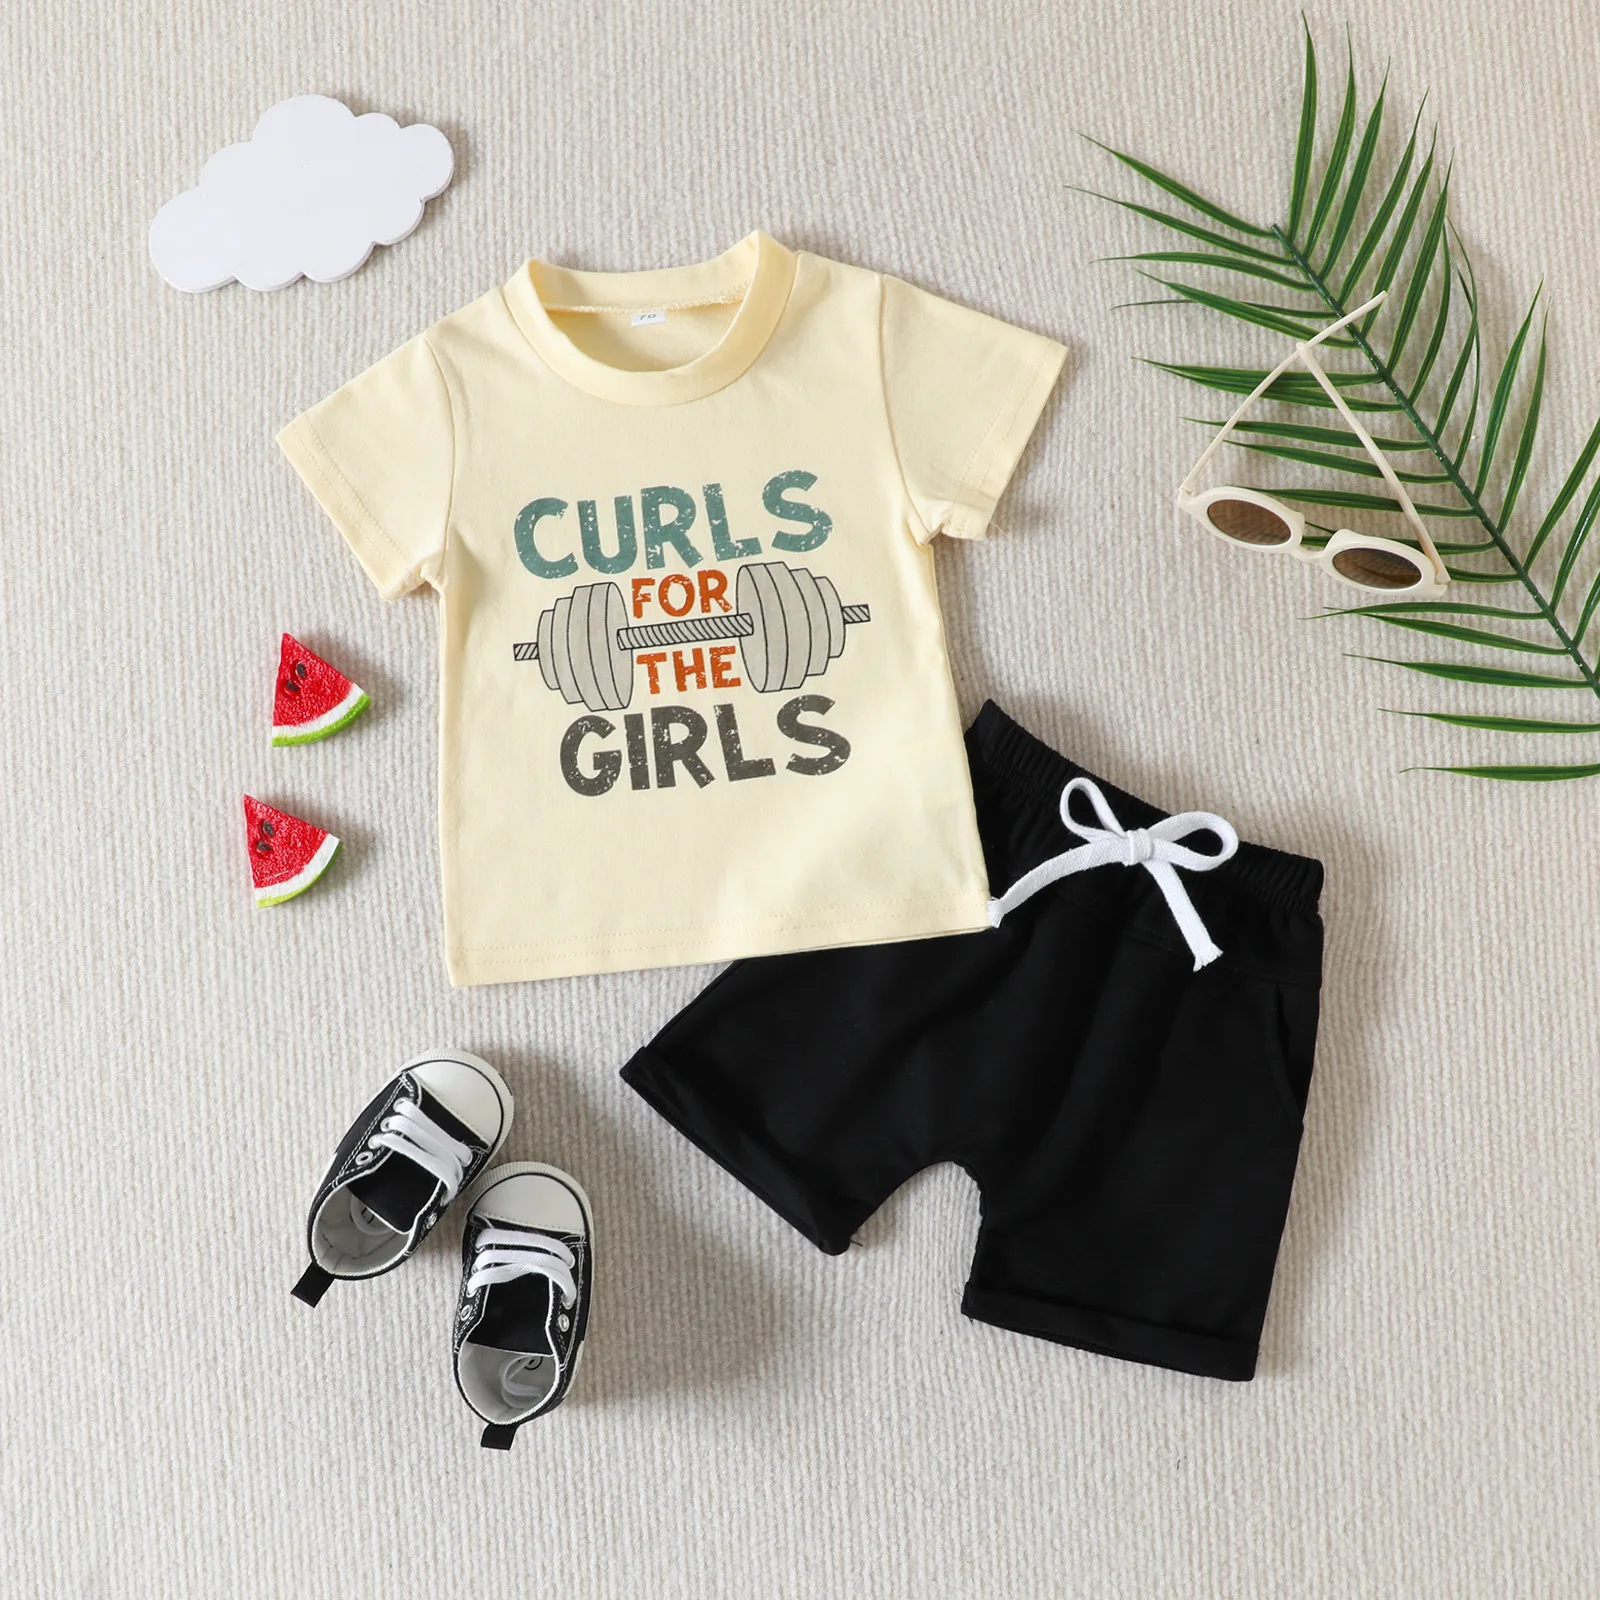 Wholesale newborn baby clothing sets short sleeve t-shirt+shorts two piece summer casual kids boys biker suits